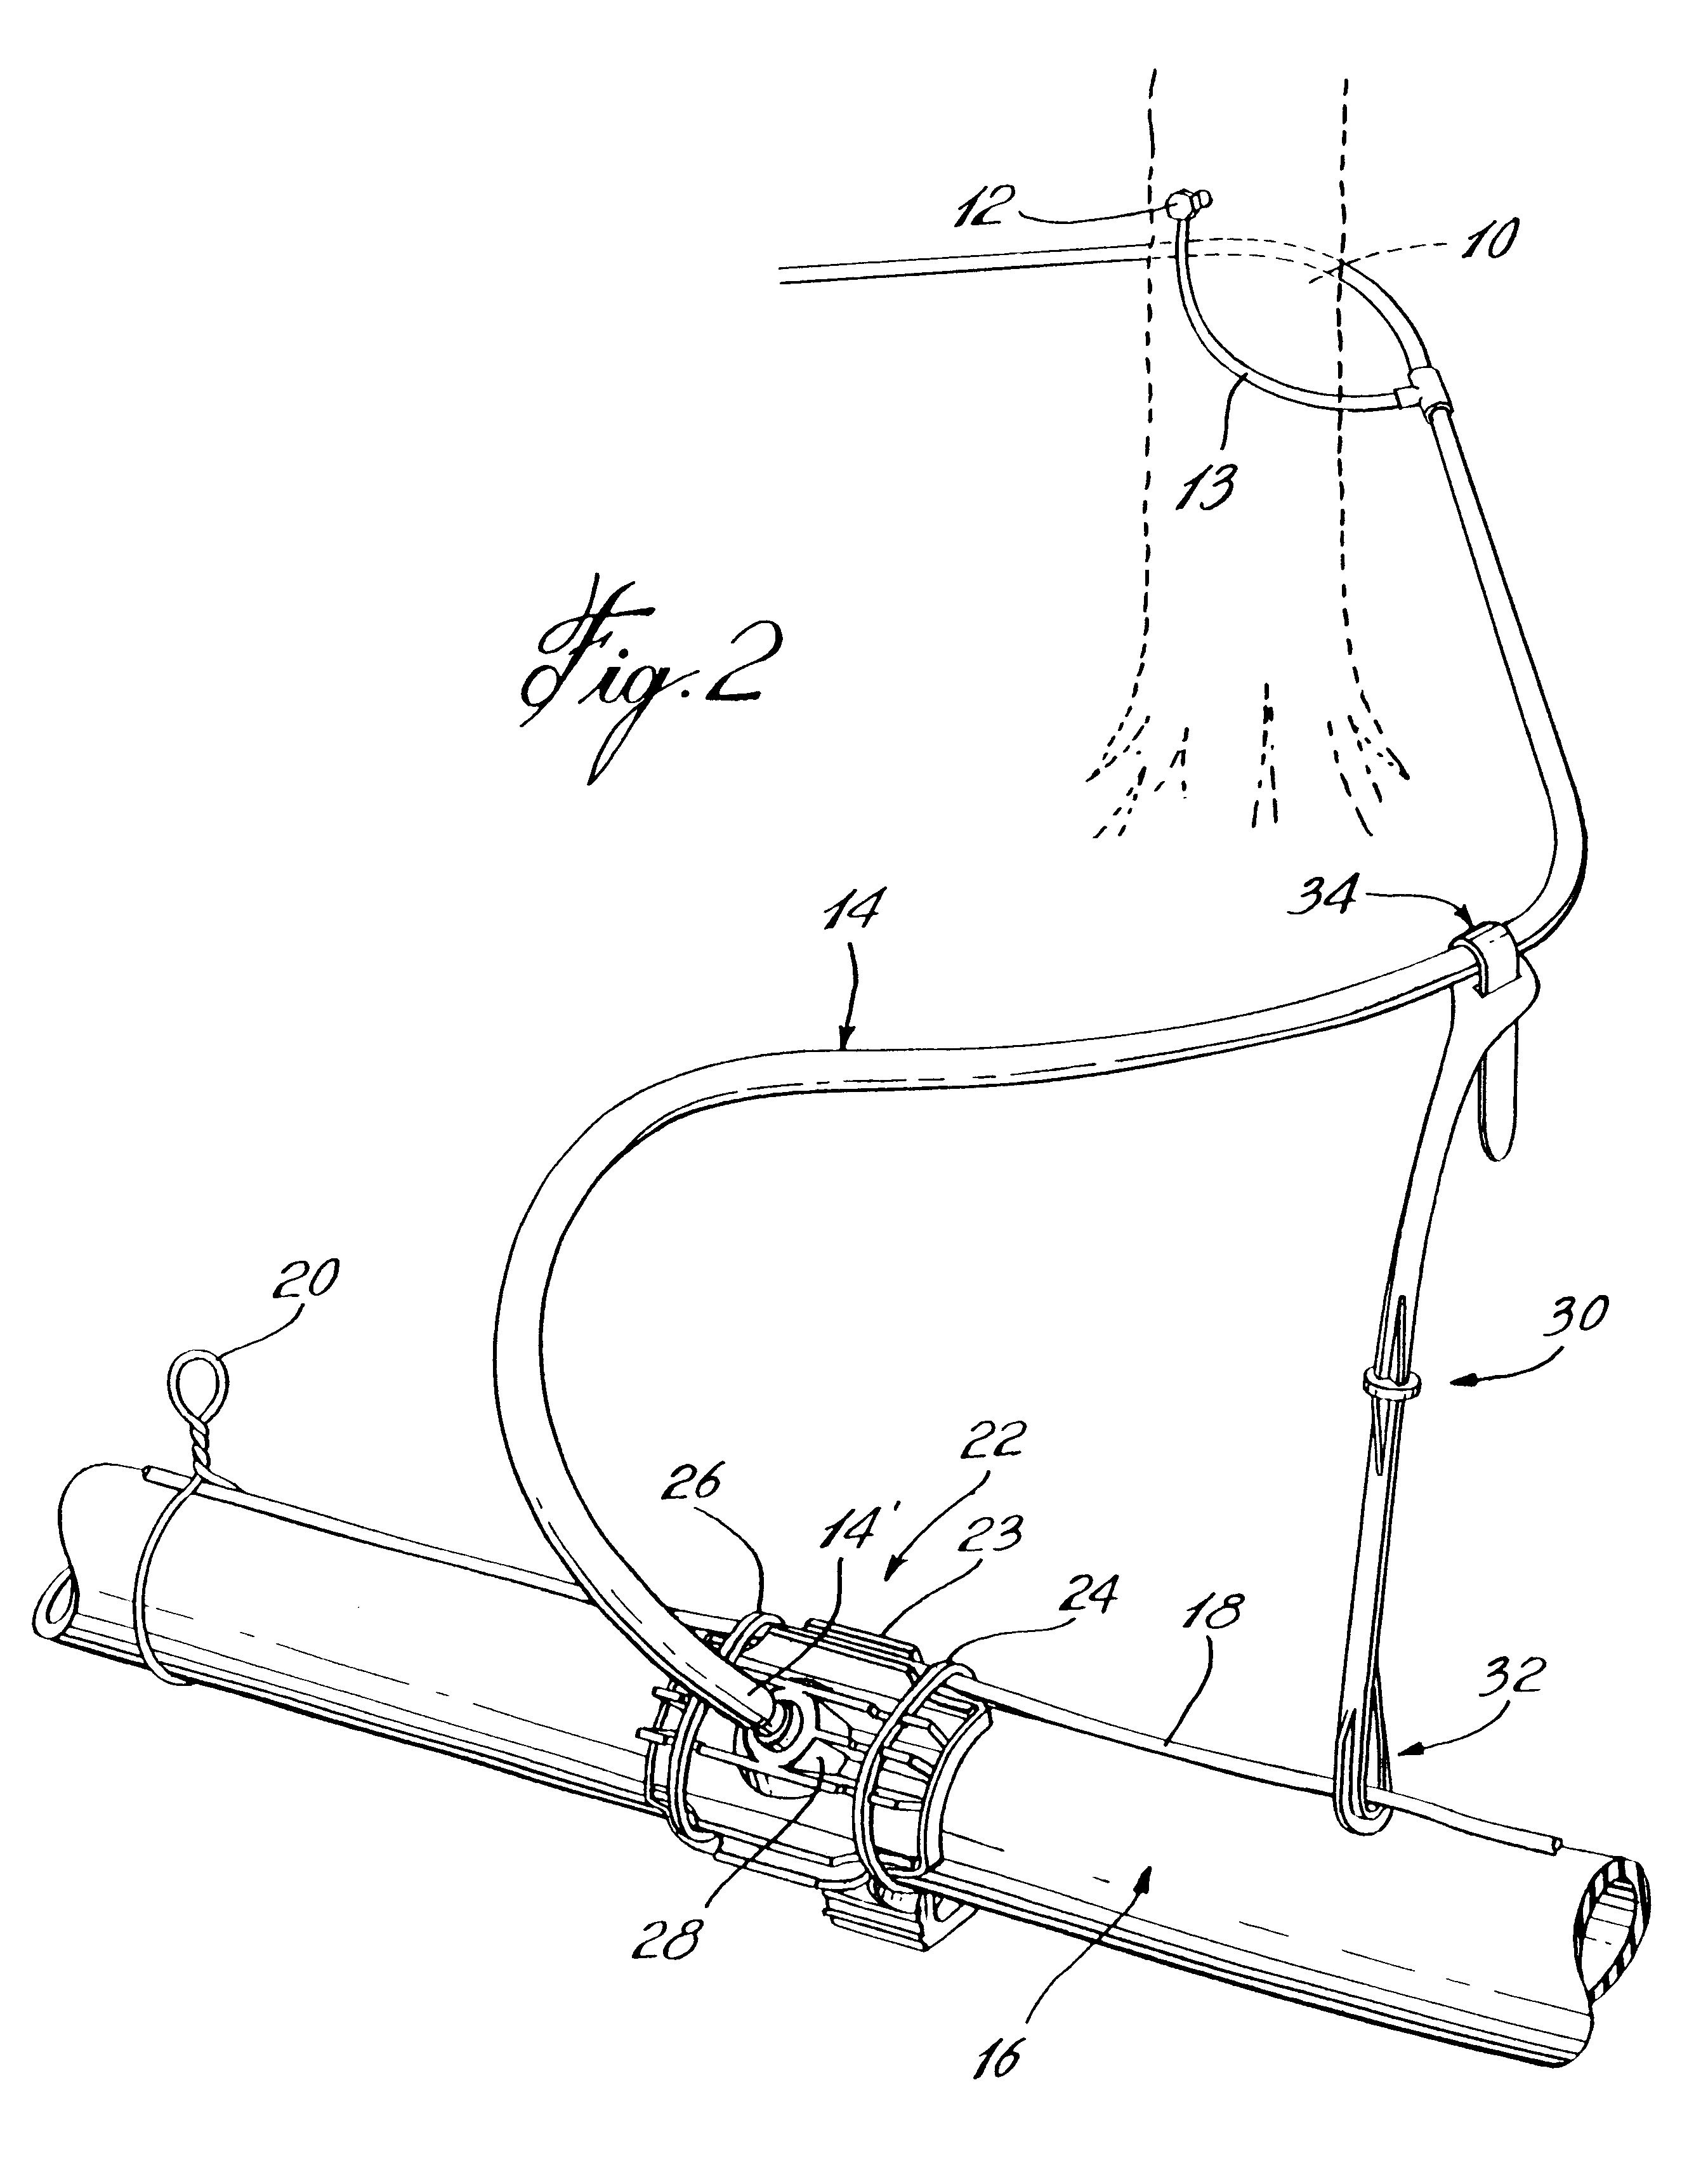 Protection device for tubular conduits of a sap collecting system